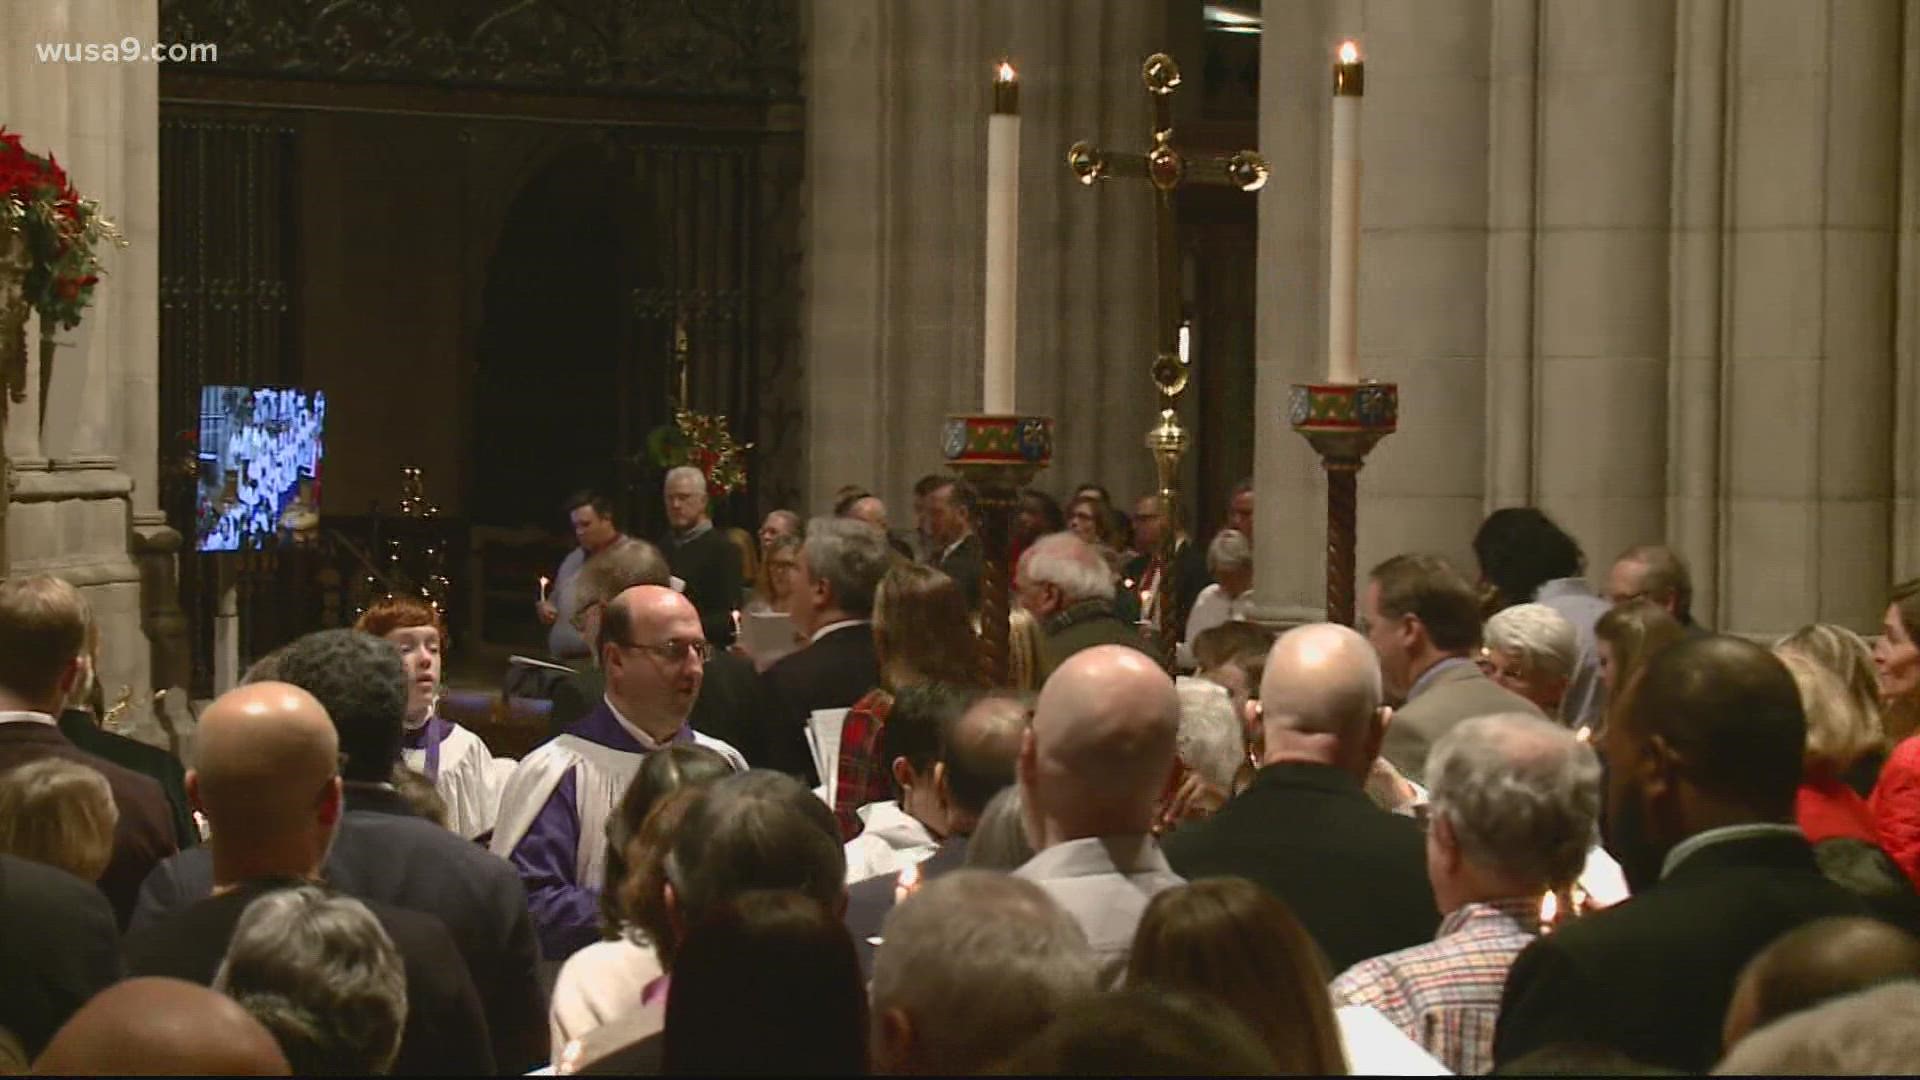 People who wish to attend services virtually can visit the National Cathedral YouTube channel or the church's website.